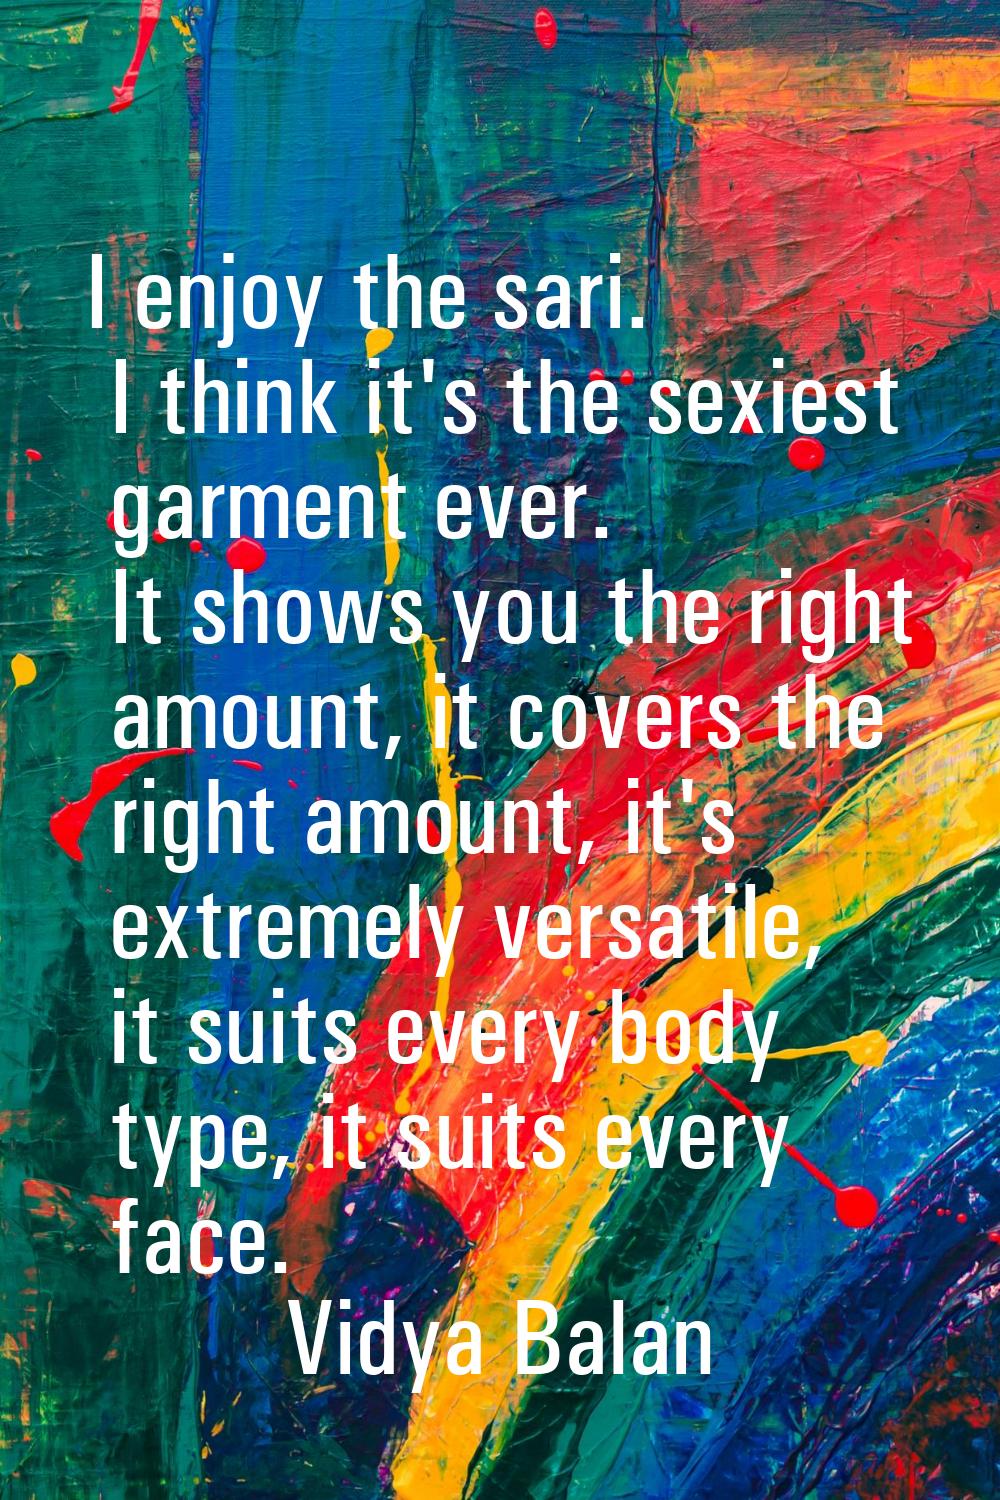 I enjoy the sari. I think it's the sexiest garment ever. It shows you the right amount, it covers t